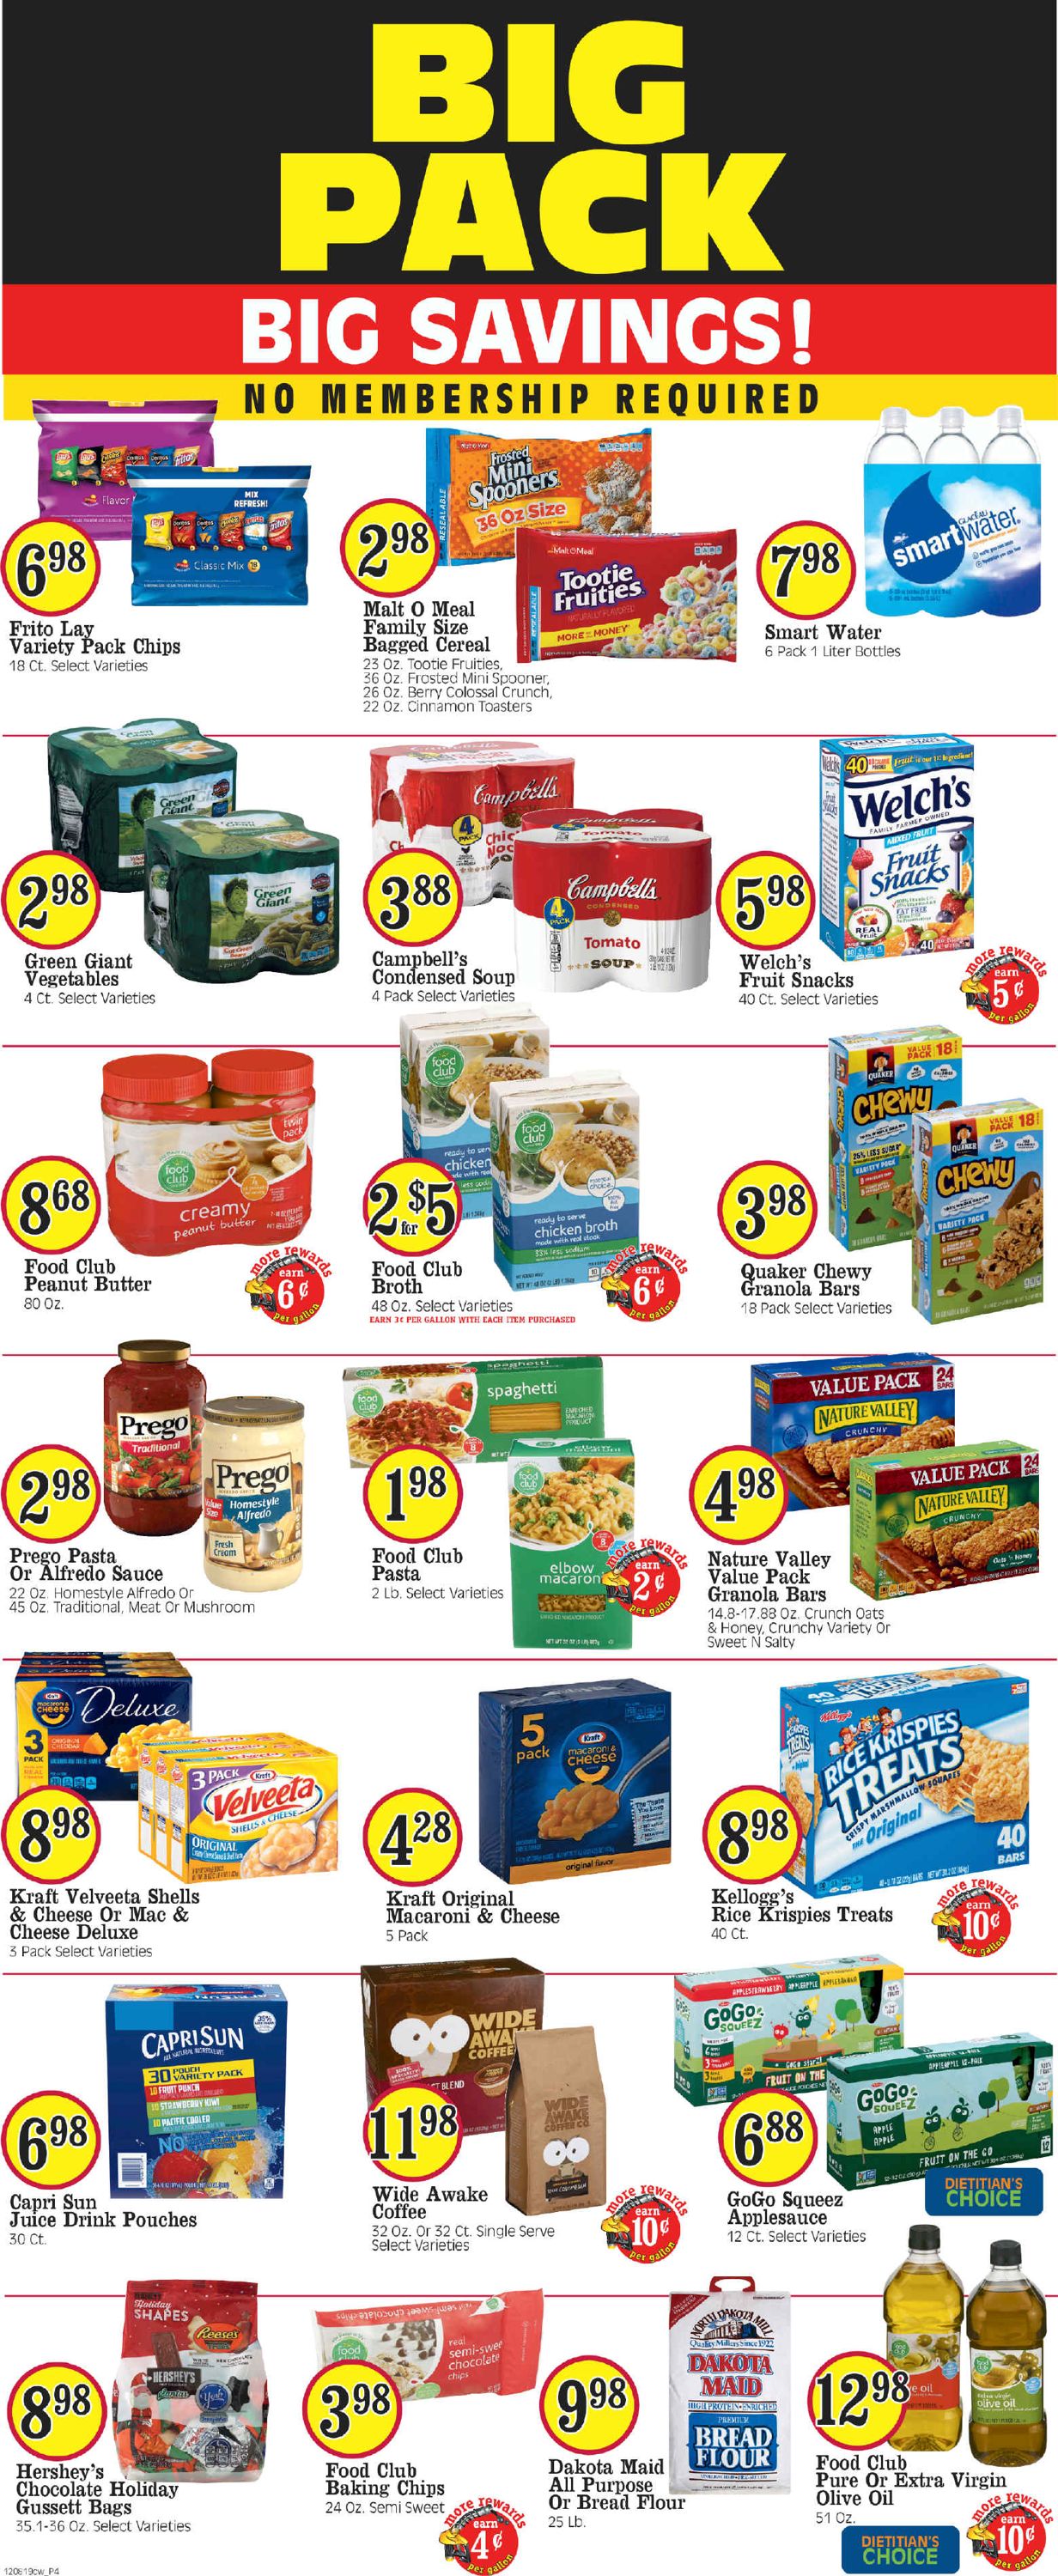 Cash Wise - Holidays Ad 2019 Weekly Ad Circular - valid 12/08-12/14/2019 (Page 4)